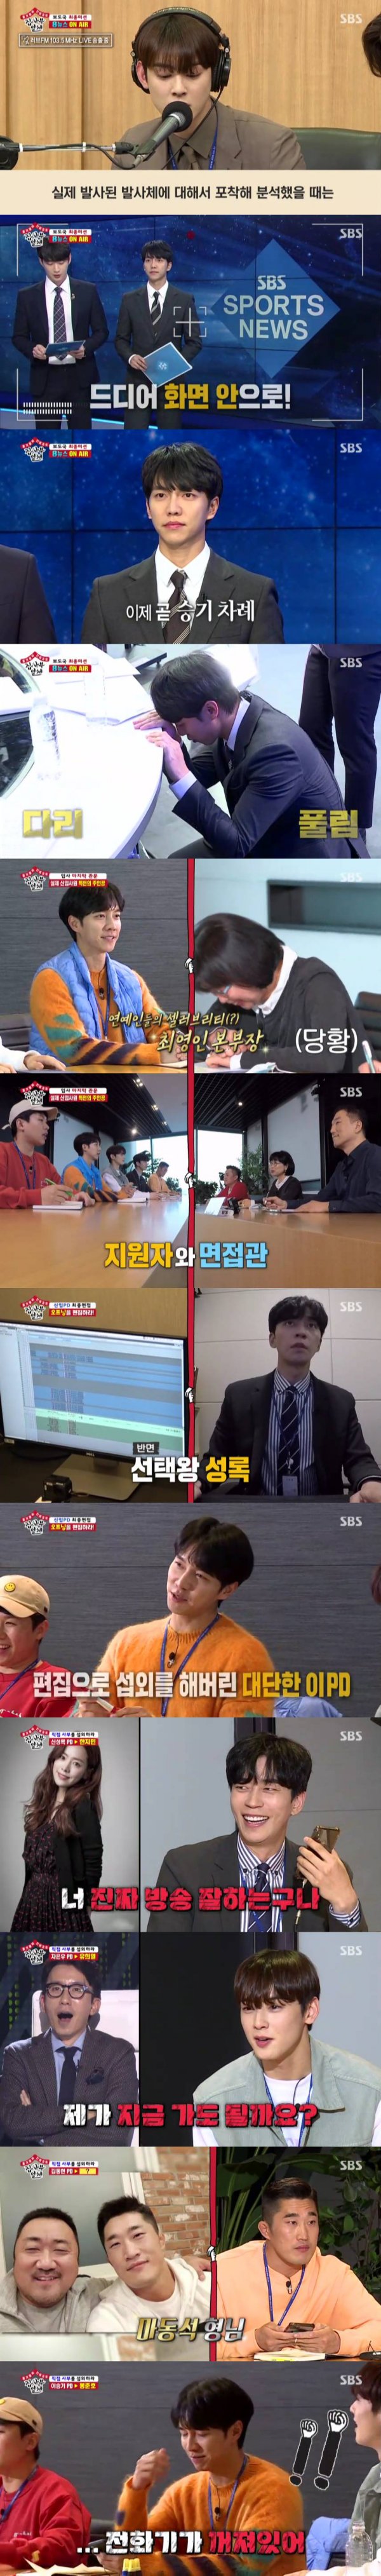 SBS All The Butlers Lee Seung-gi was skilled, and Cha Eun-woo was hired as a career PD and new employee with unlimited growth potential.SBS All The Butlers, which was broadcast on the 26th, has a 5.6 percent audience rating for households and a 2049 target audience rating that is an important indicator of the people concerned and leads the topic.2 percent (based on the second part of the metropolitan area); also, in the scene where Yang Se-heeong called to get Baek Jong-won to the master, the highest audience rating per minute was 6.It climbed to 5% and became the best one minute.On the day of the show, Lee Seung-gi, Shin Sung-rok, Yang Se-hyeong, Cha Eun-woo and Kim Dong-hyun were shown trying to experience the broadcasting station.Lee Seung-gi challenged the SBS 8 News sports news. Kim Yoon-sang said, The prompter may be turned off today.I have to be careful like that. He made Lee Seung-gi nervous.In fact, Lee Seung-gi was preparing for the live broadcast on the day, and the news order was changed on the spot because of the breaking news that the opening day of the Tokyo Olympics was confirmed.Lee Seung-gi, who seemed nervous, repeated the practice until just before the live broadcast, and when he was nervous, he succeeded in perfecting the comment and impressed me.Cha Eun-woo, who was in charge of radio news broadcasts, also calmly finished radio broadcasts.Prior to the release of the video, Park Sung-hoon, CP, said, There is no correct answer, but there is a wrong answer. Then, five members editorial videos were released.First, the self-centered Cha Eun-woo video was released, and Kwak Seung-young, CP, said, The theme consciousness is excellent.I did not see anything except Cha Eun-woo. Lee Seung-gi, in the meantime, made me laugh at interviewers by creating a scene where Cha Eun-woo wants to fix All The Butlers with Devils Editing.After watching the video, Choi Young-in, director of the entertainment division, explained the purpose of the project, saying, I wanted to let you know that it takes a lot of time and effort to edit a short time.The second task was to direct the master. Choi Young-in said, We meet each others needs.We really want to think about what we need from the position of the person, he said.The members, who were embarrassed by the unexpected task, soon mobilized their own network. Shin Sung-rok called actor Han Ji-min, Cha Eun-woo called Yoo Hee-yeol, and Kim Dong-hyun called Ma Dong-seok.They persuaded their opponents actively and enthusiastically to laugh, and they led to praise from interviewers with a convincing appearance.Lee Seung-gi contacted Bong Joon-ho, but unfortunately the phone was off; Lee Seung-gi, however, left a clear and coherent voice message and caught his eye.Yang Se-heeong called Baek Jong-won, who is appearing on SBS Maman Square together.Yang Se-heeong persuaded Baek Jong-won, saying, I called the SBS intern Yang Se-heeong PD, not the handmade Yang Se-heeong.What am I? Baek Jong-won said to the continued persuasion of Yang Se-heeong, I can not say Do not laugh when you talk like this.I think its a good idea, so lets worry about it. He also invited the members to his house.This scene, in which Yang Se-heeong spoke with Baek Jong-won for the masters invitation, brings both pleasure and anticipation and audience rating 6.It took the best one minute at 5 percent.Finally, the final results were announced. Choi Young-in, general manager, said, Lee Seung-gi was the most experienced, and Cha Eun-woo grew up in a short period of time.He said, I saw the possibility of growth, he said, The skill is also very important, and Lee Seung-gi said he would hire as a career PD. Cha Eun-woo and Lee Seung-gi hugged each other and were delighted.